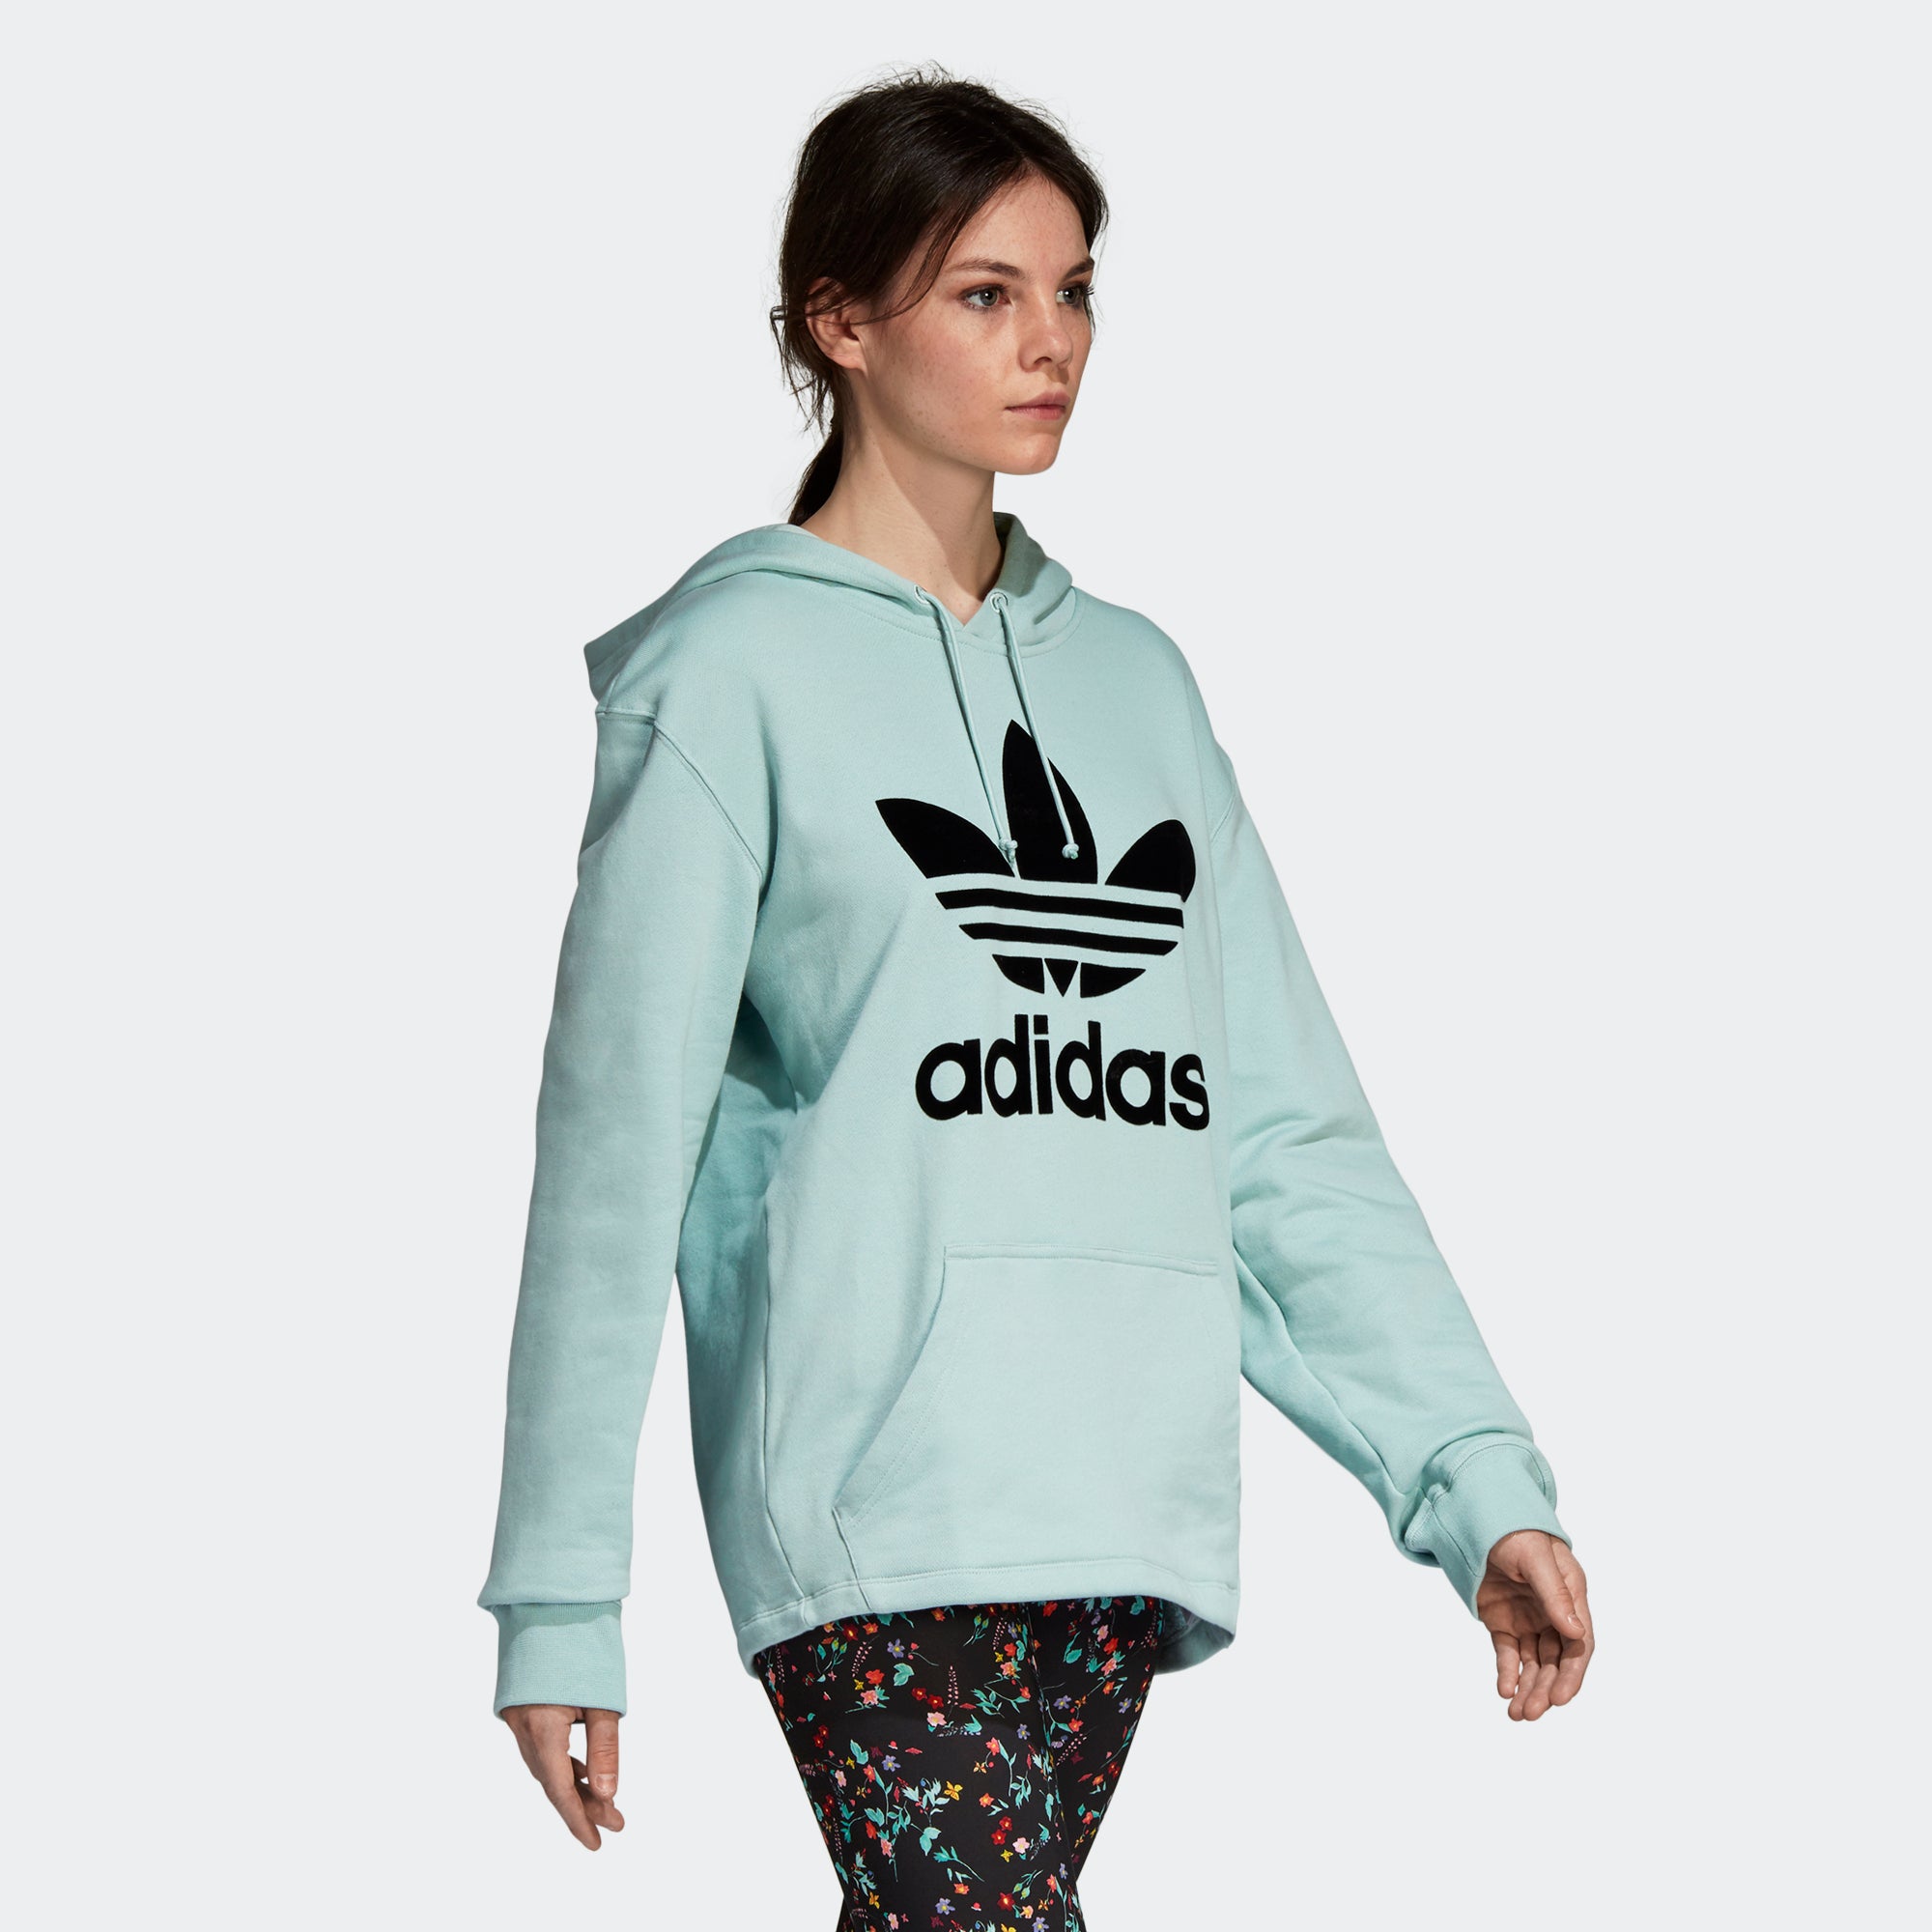 adidas Oversize Hoodie Ash Green DH4256 